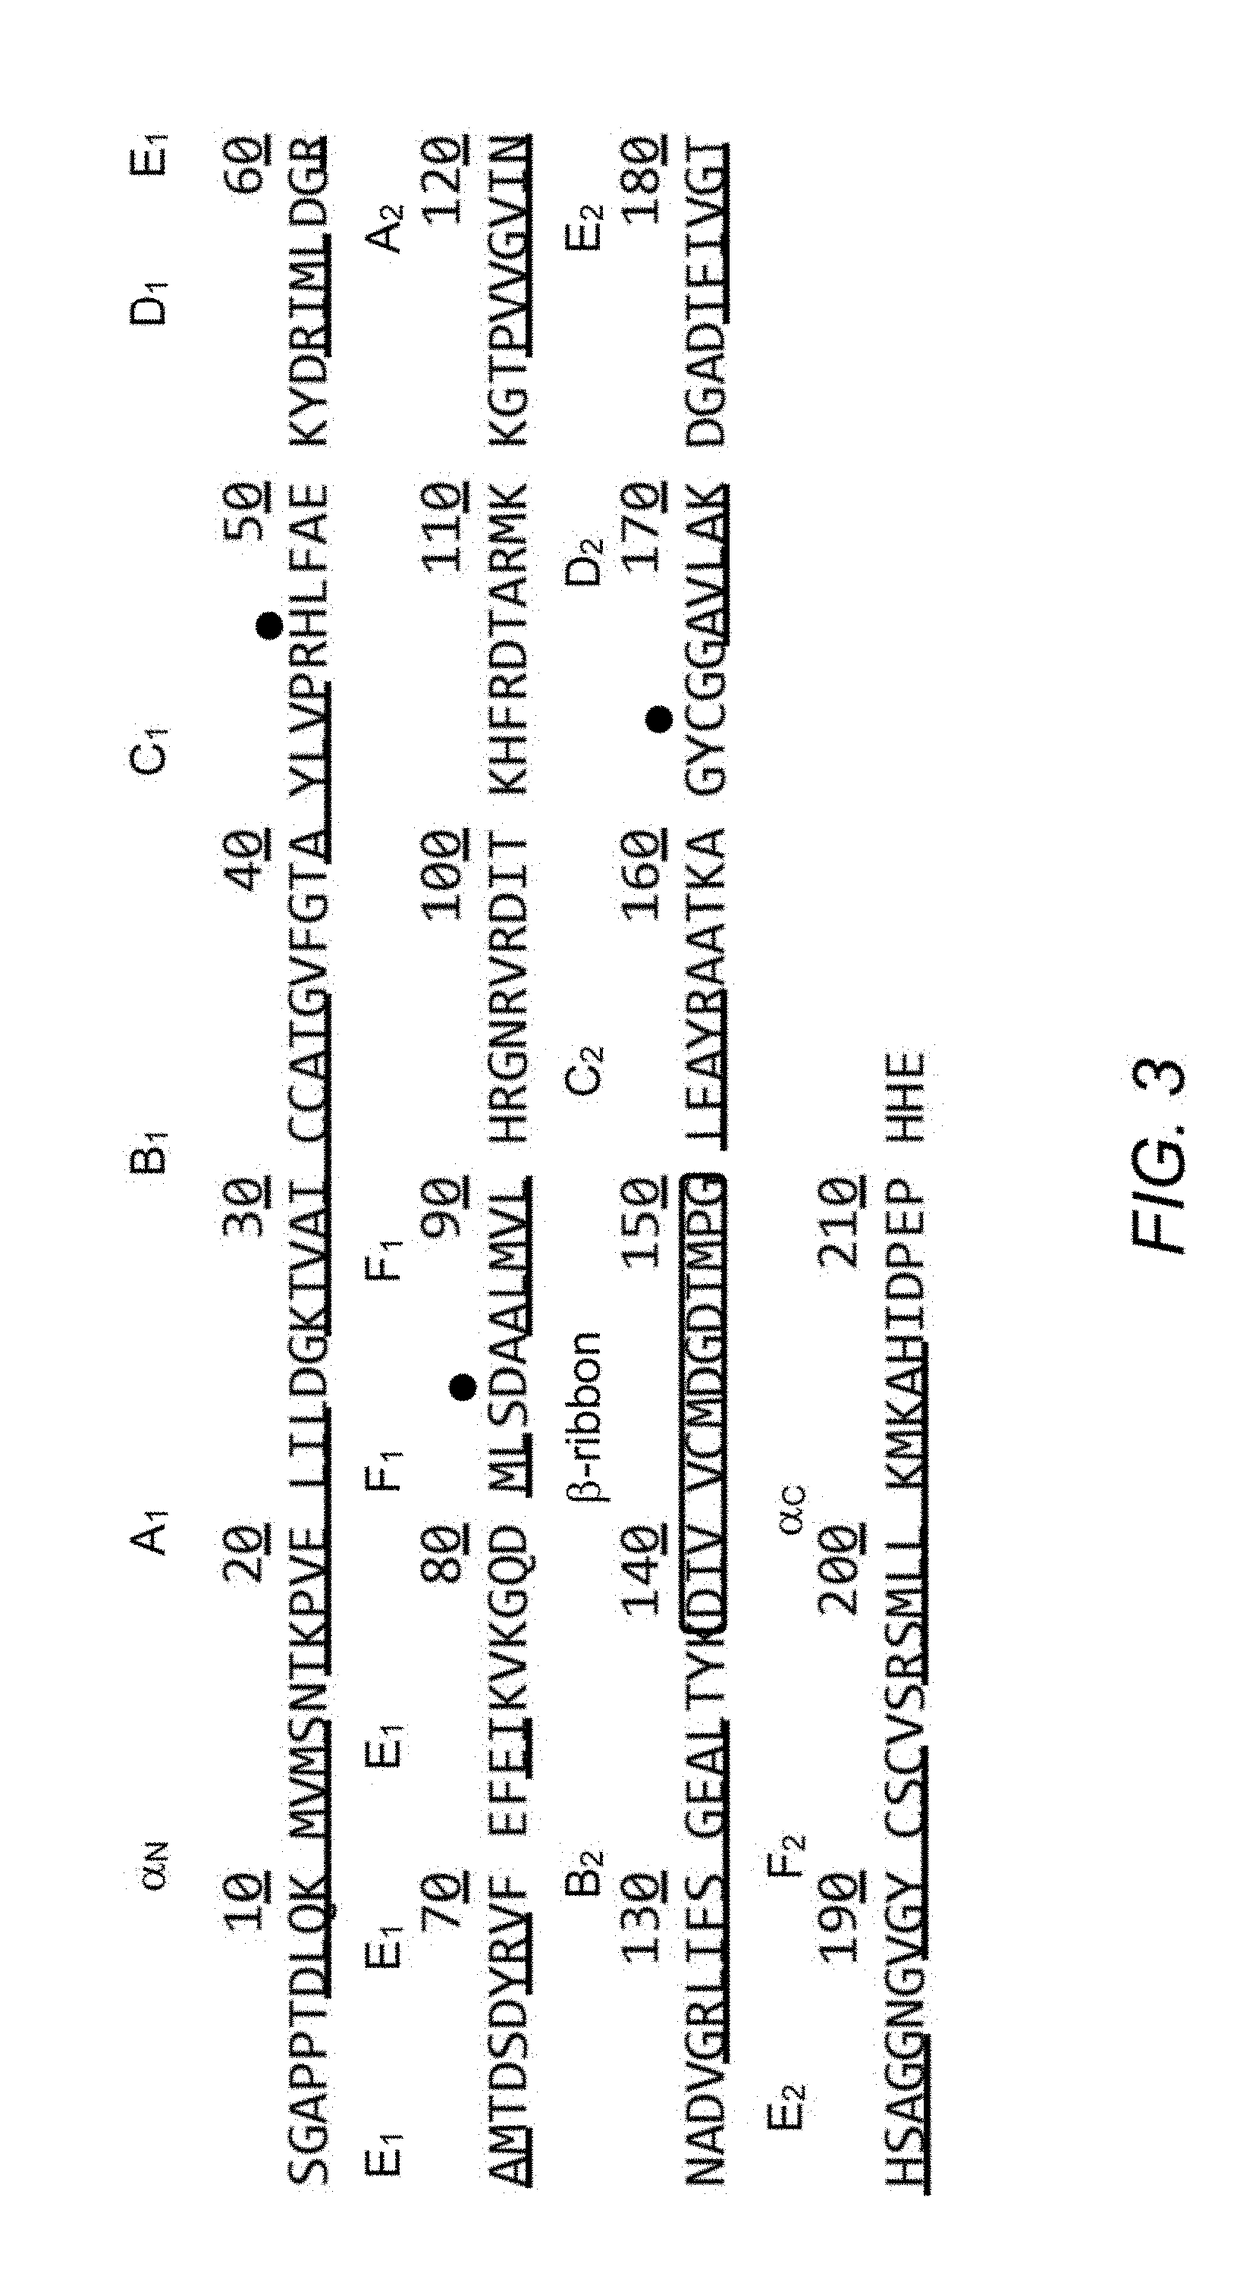 Modified Foot-And-Mouth Disease Virus 3C Proteases, Compositions And Methods Thereof